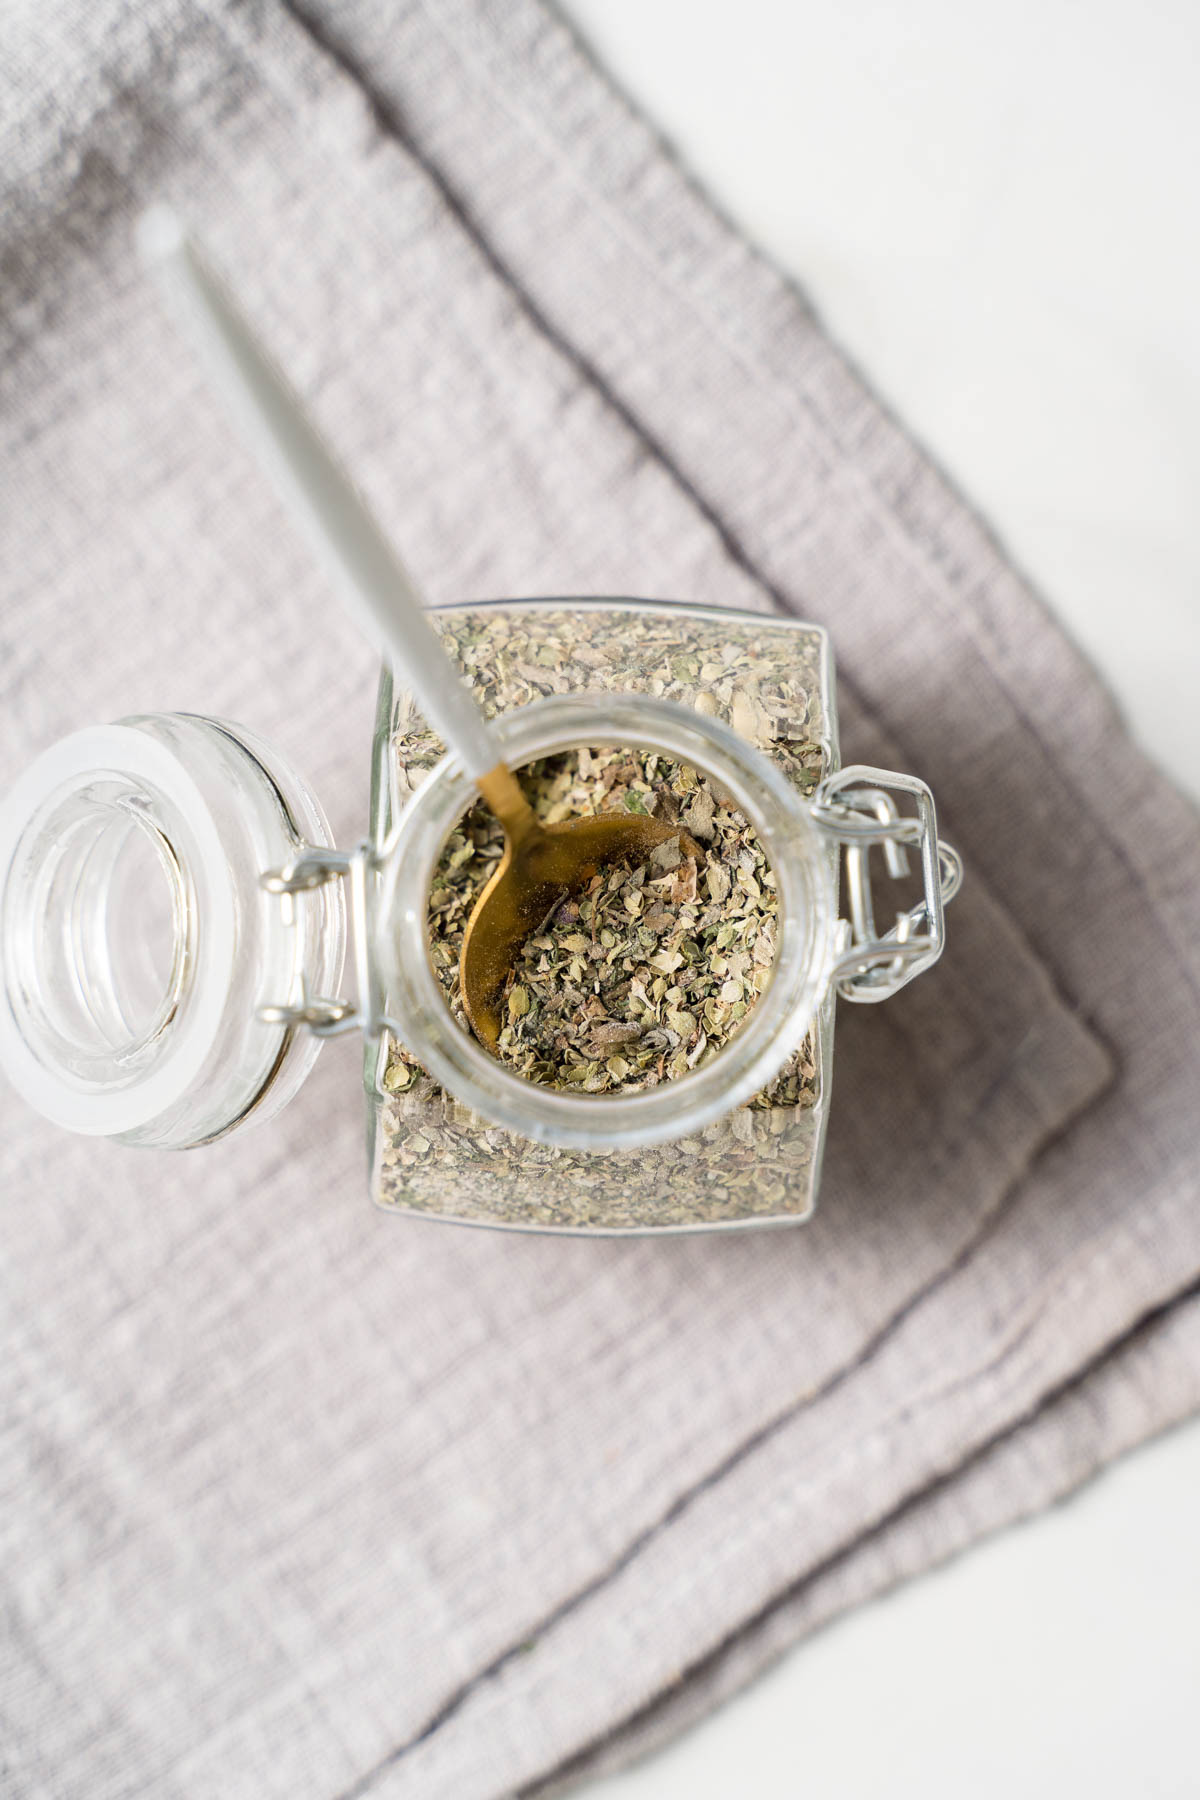 Image of greek seasoning in a glass lidded jar with a spoon resting in the spice blend. 